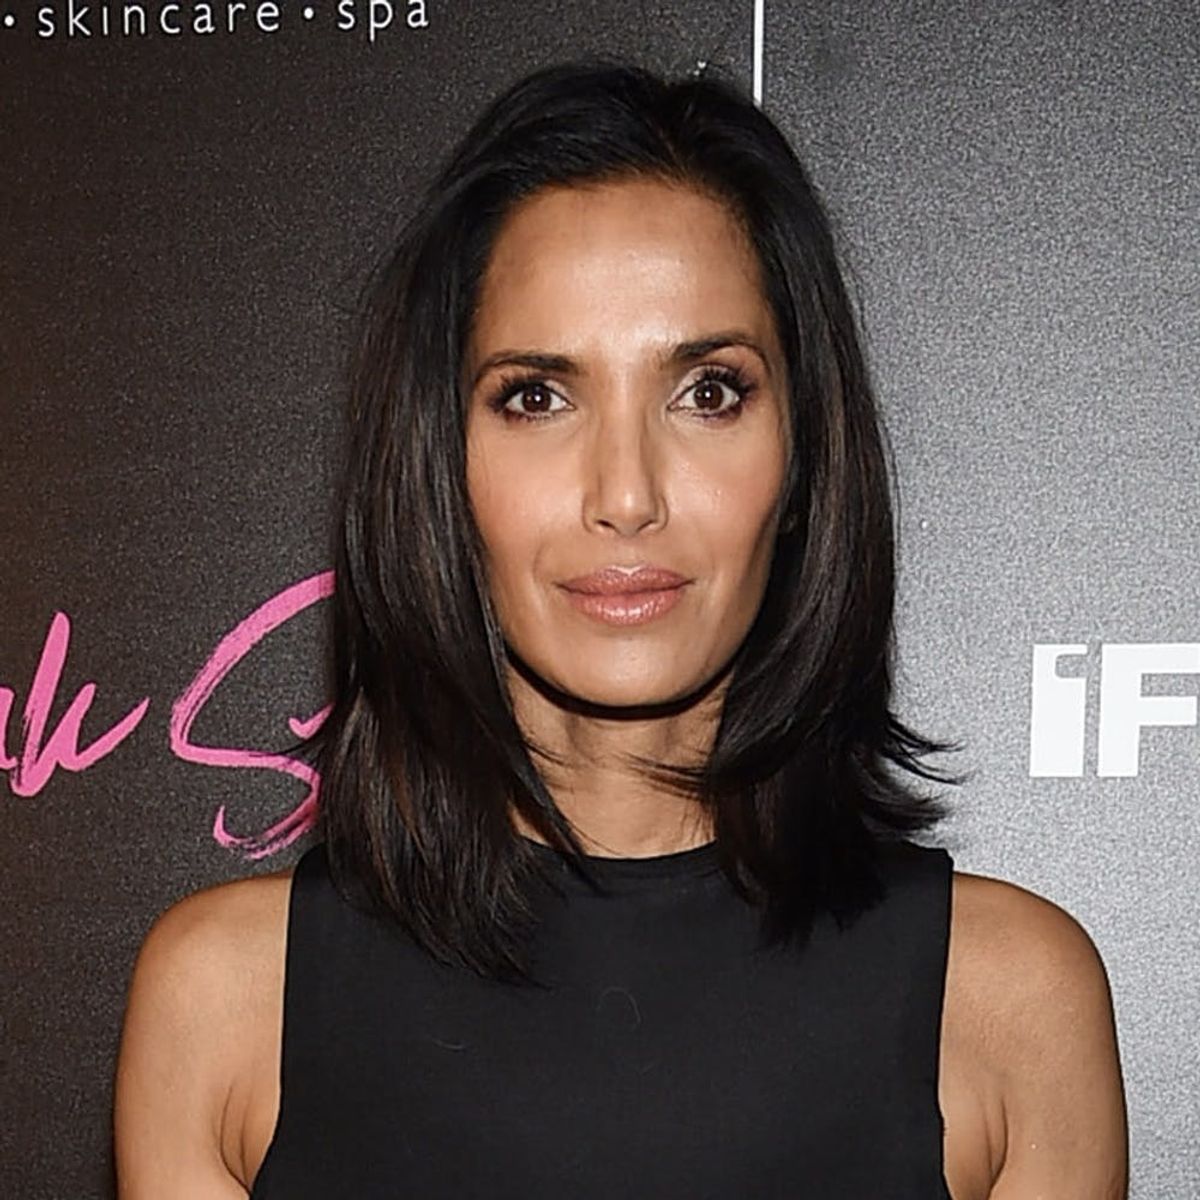 Padma Lakshmi Is Teaming Up With MAC for a Hot New Capsule Collection